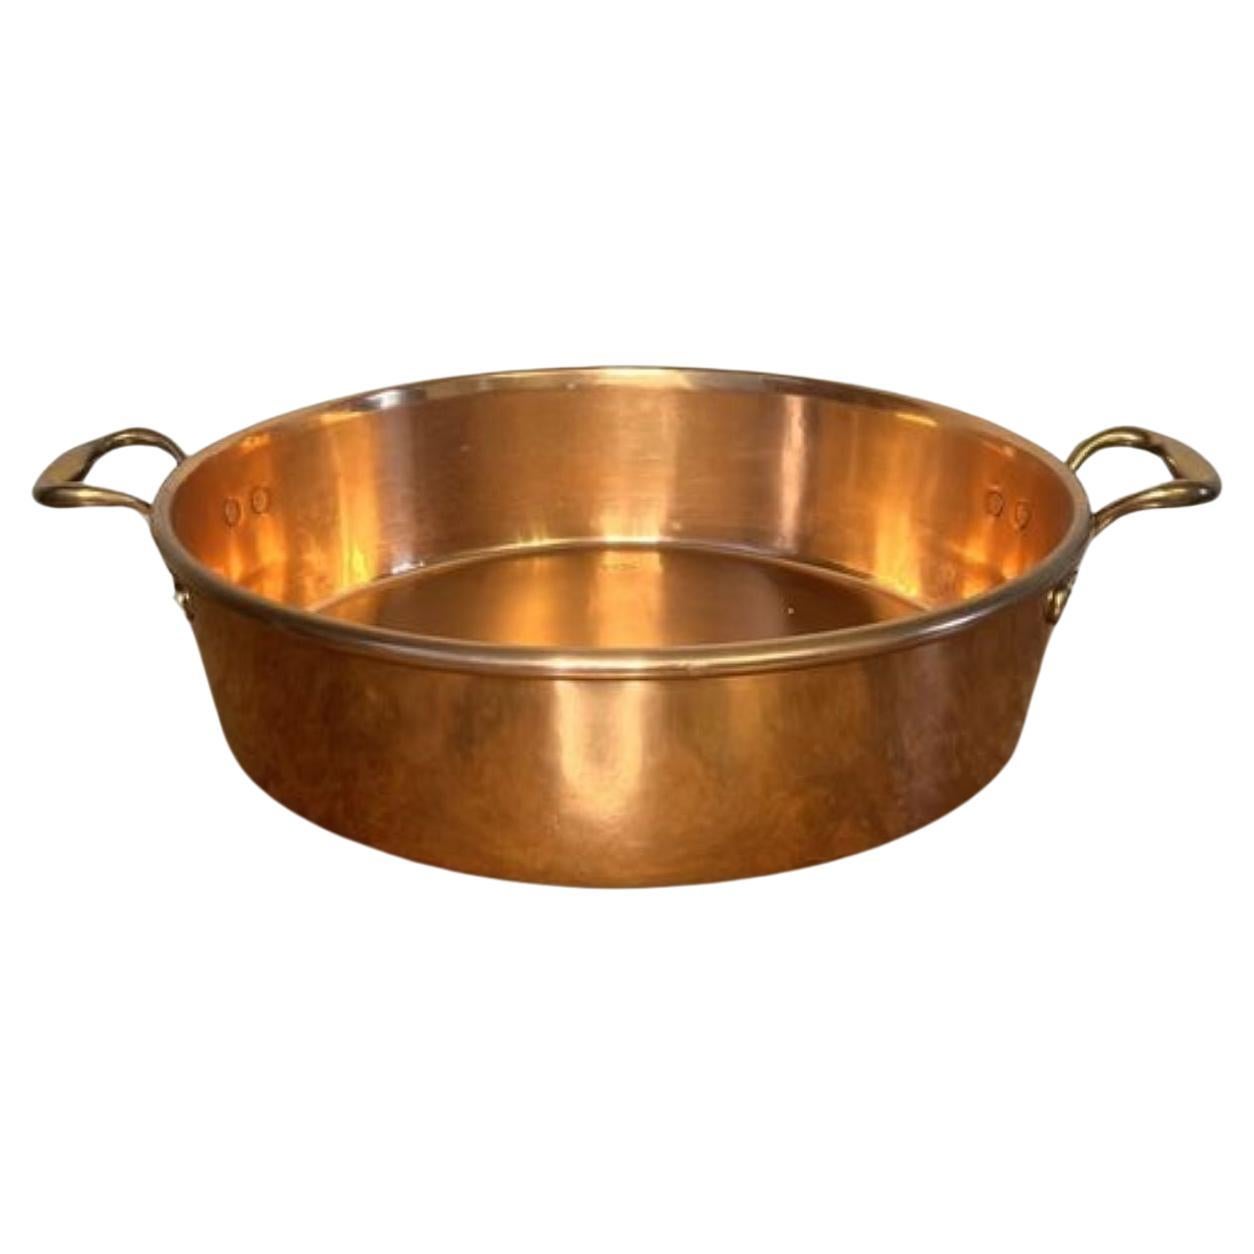 Are copper pans any good?